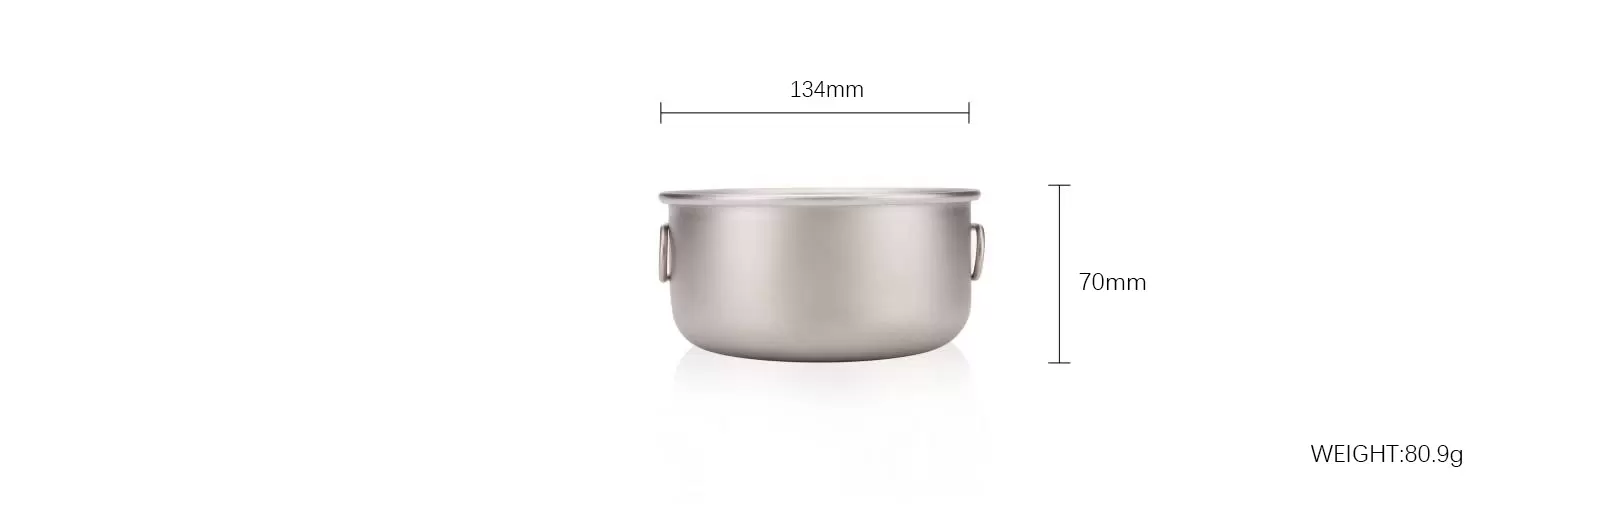 details of Folding Titanium Outdoor bowl for Camping Use